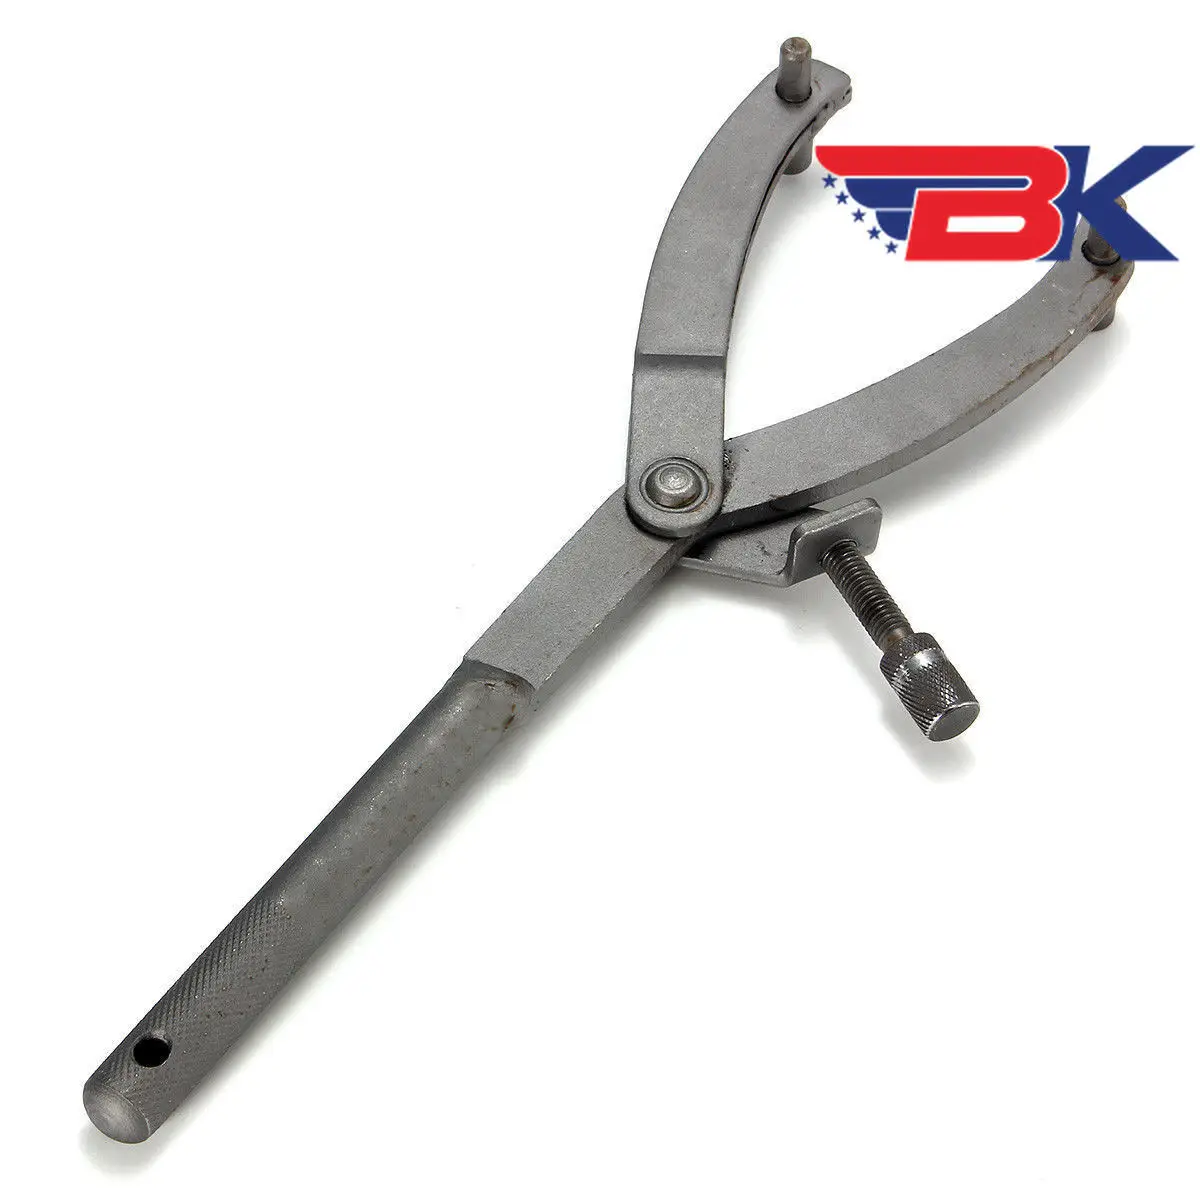 

Motor Variator Remover Puller Tool Flywheel Wrench & Removal Tool For GY6 50-150cc Moped Scooter Motorcycle Tools